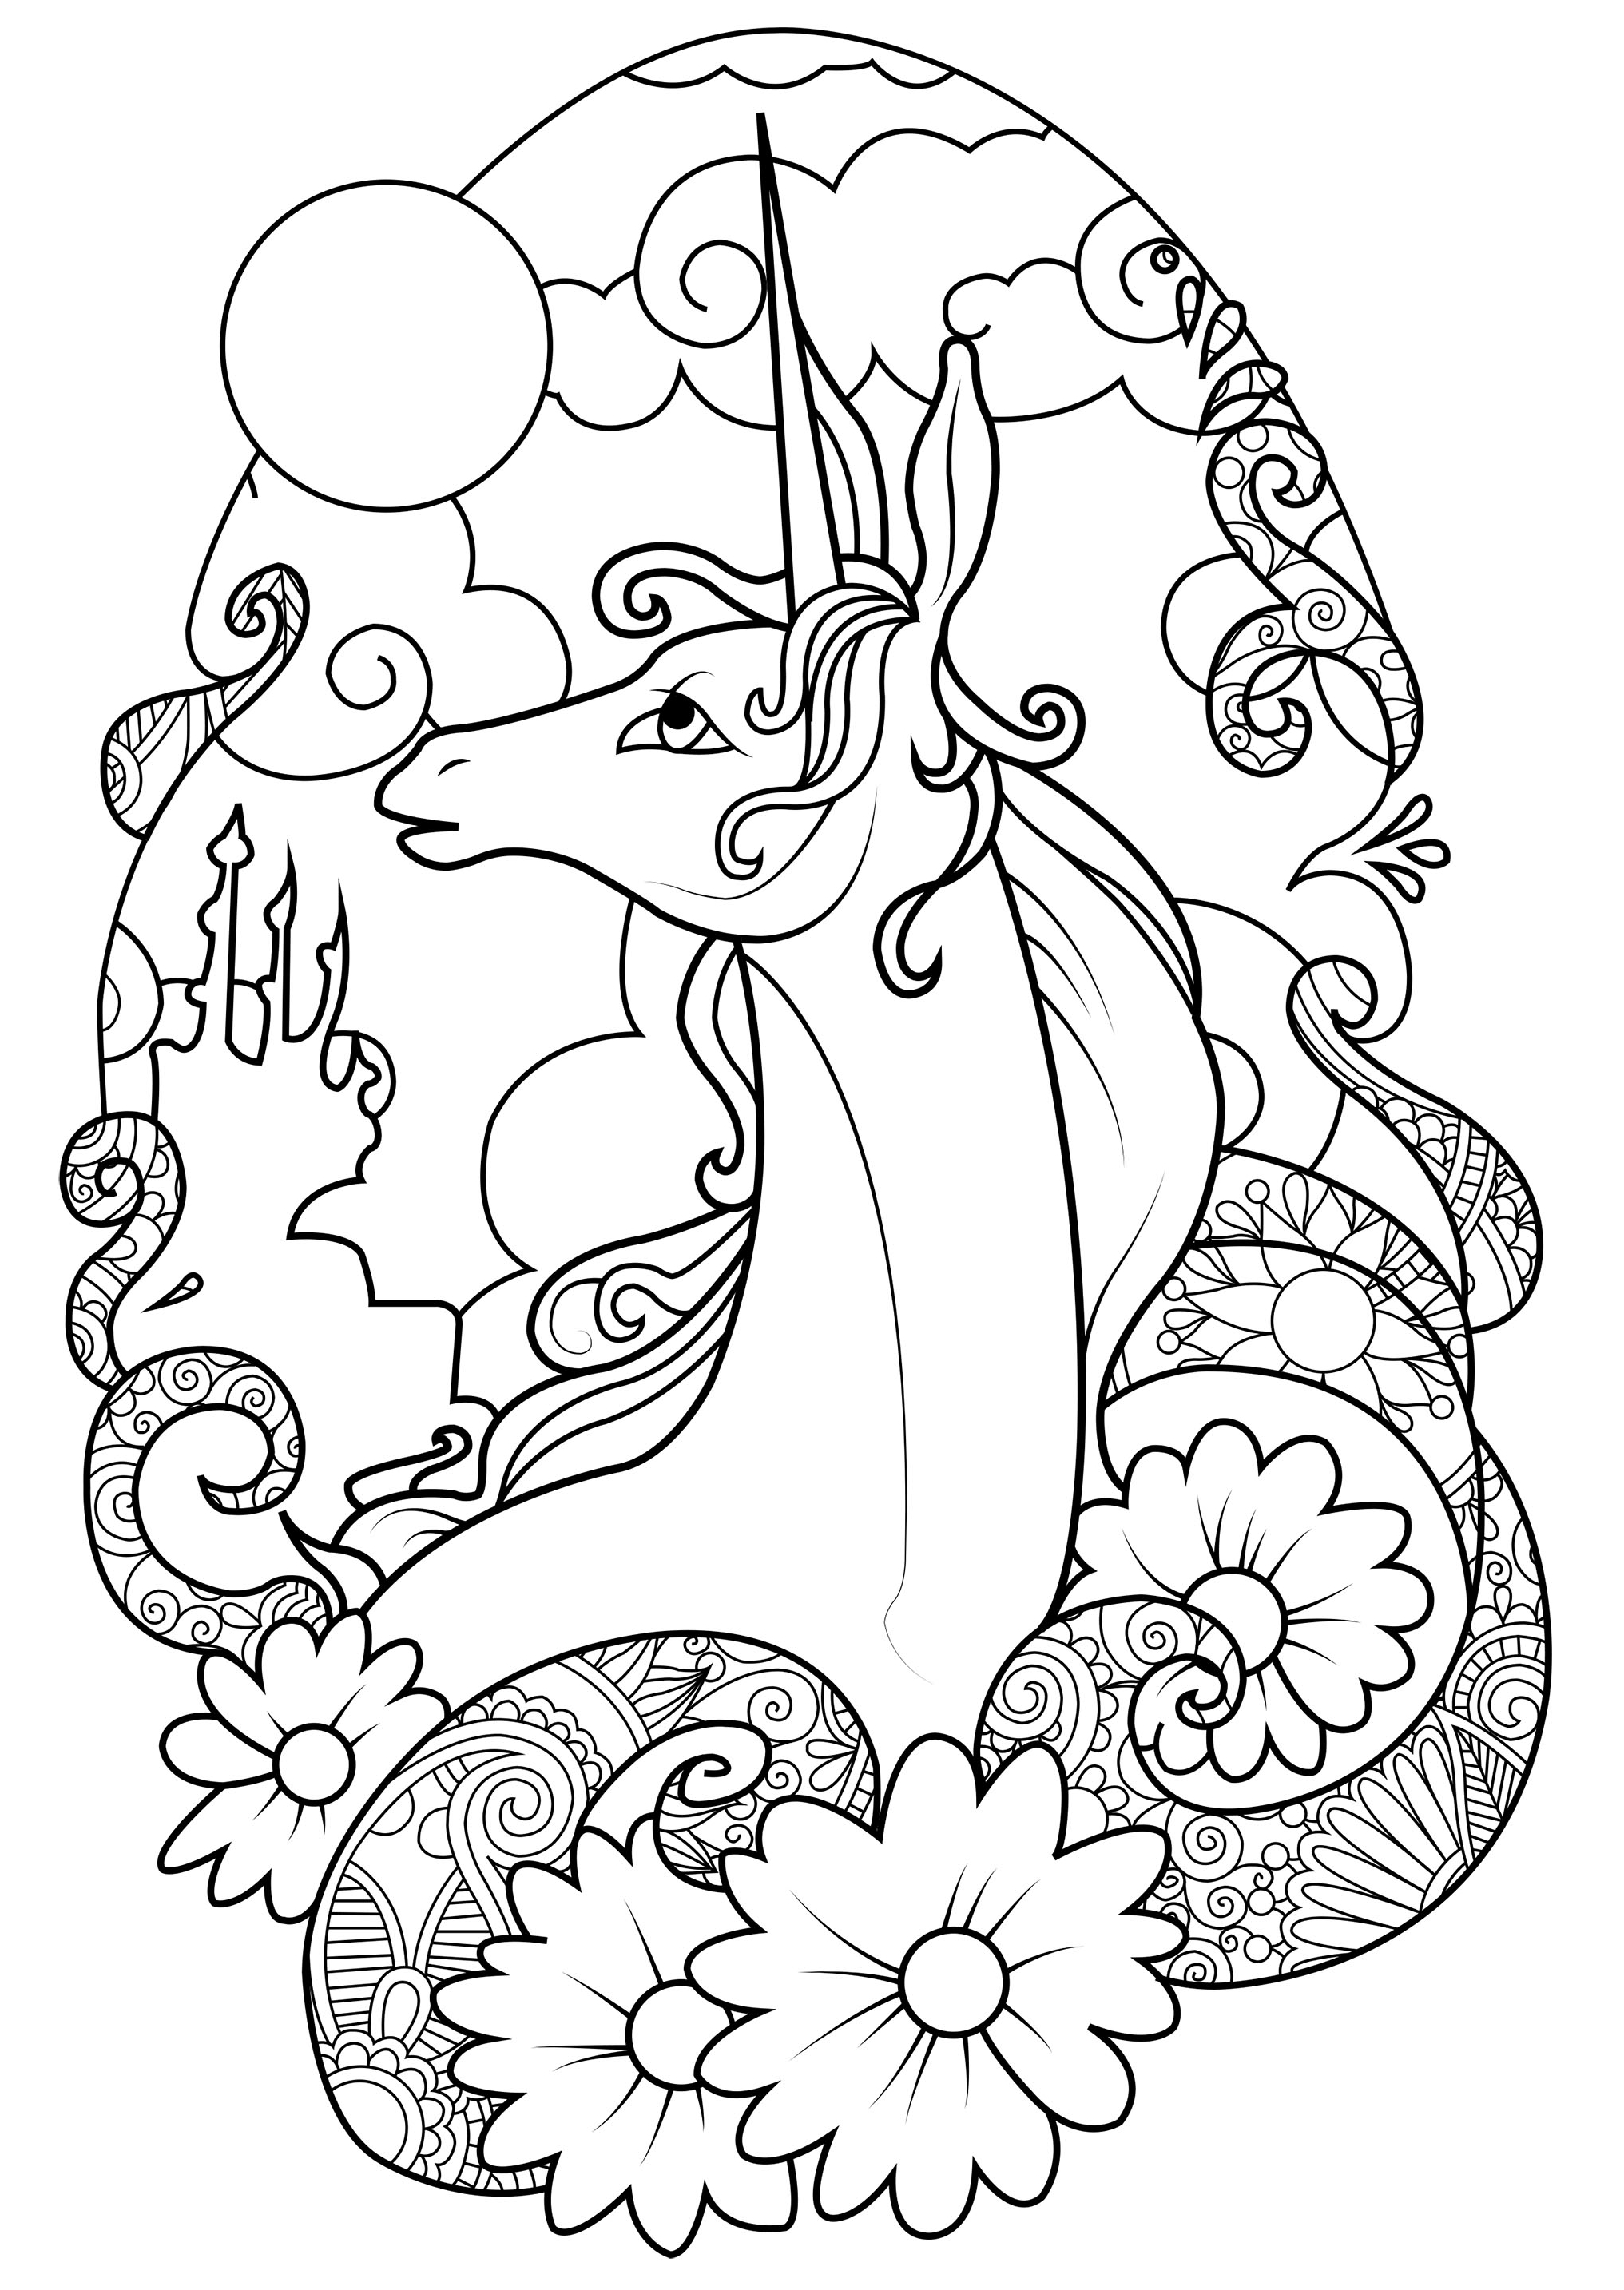 Caticorn Coloring Page Coloring Page - Unicorn Coloring Pages